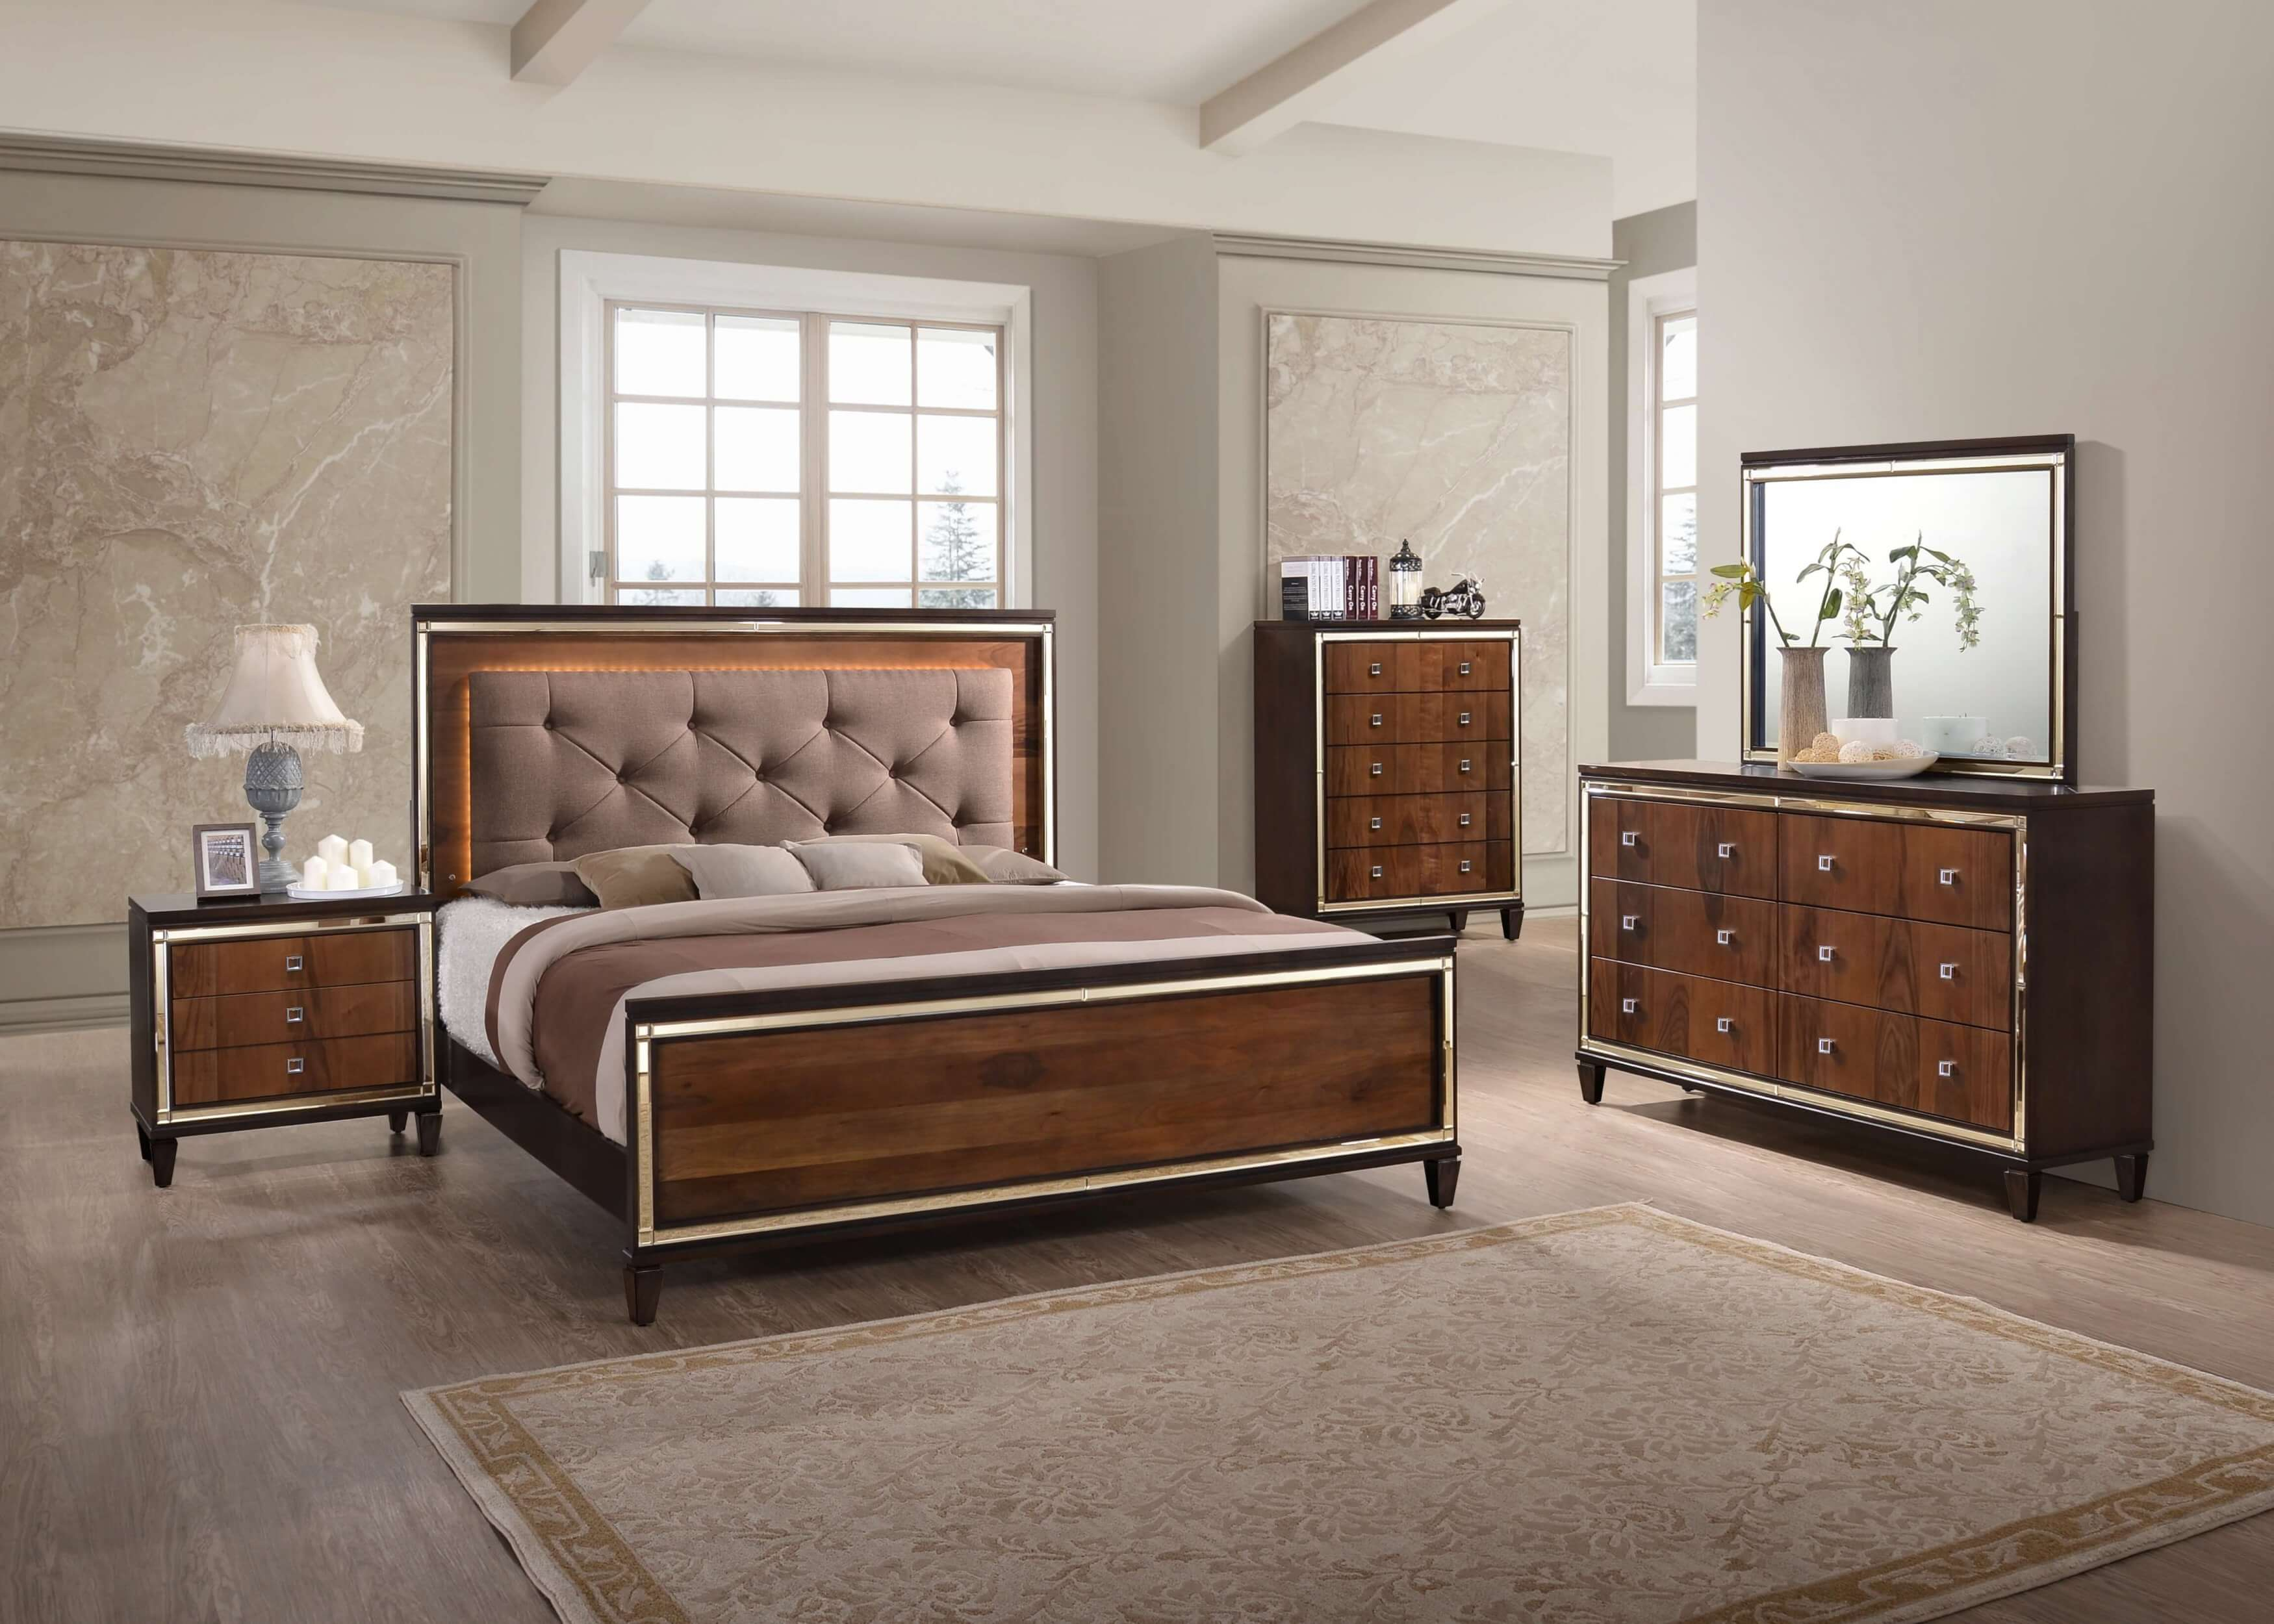 Claire Chocolate Walnut Bedroom Set Discontinued within measurements 3500 X 2500